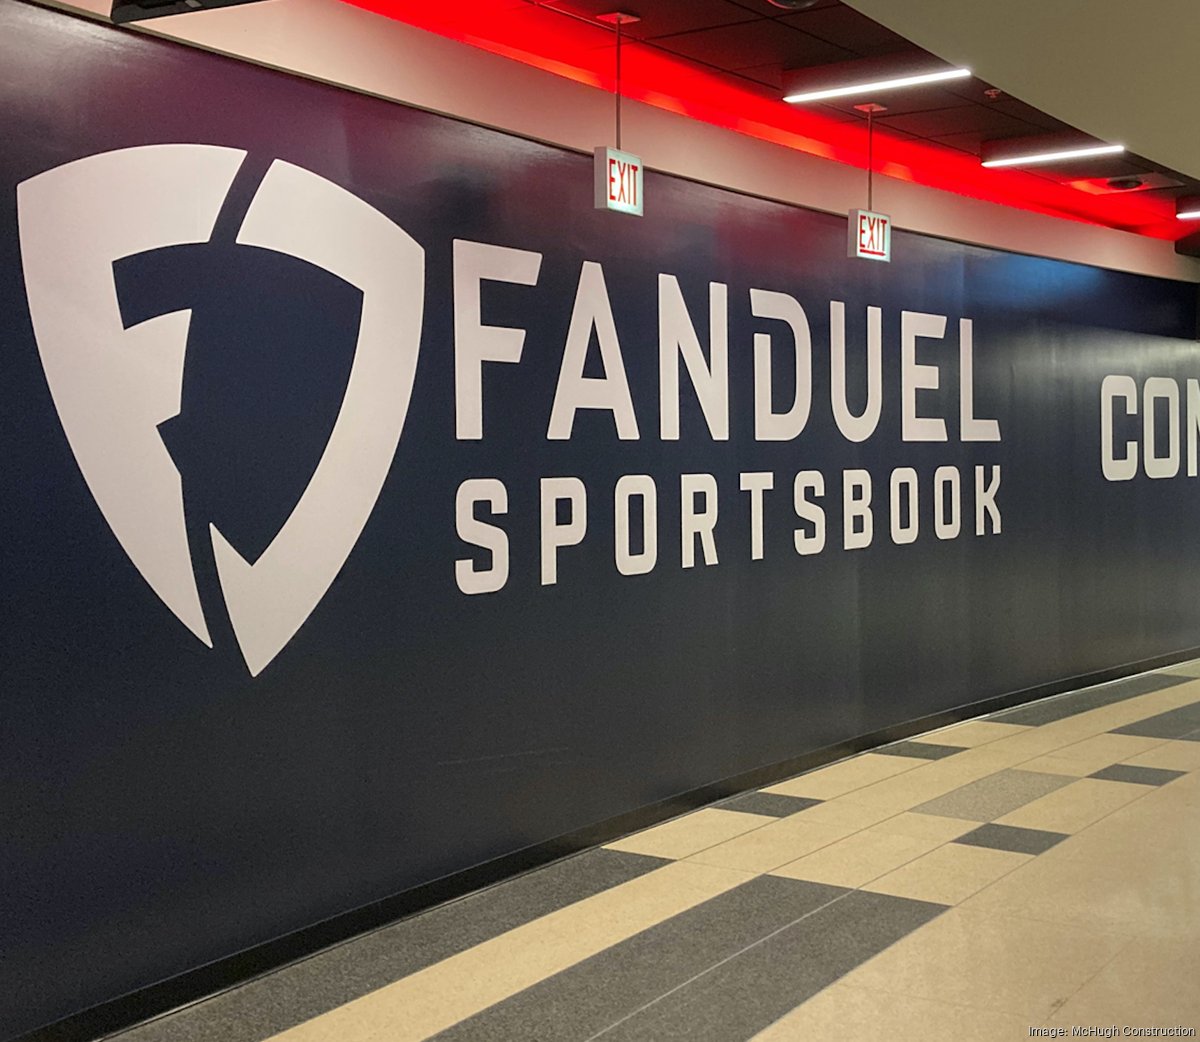 The United Center is partnering with FanDuel to open a sportsbook